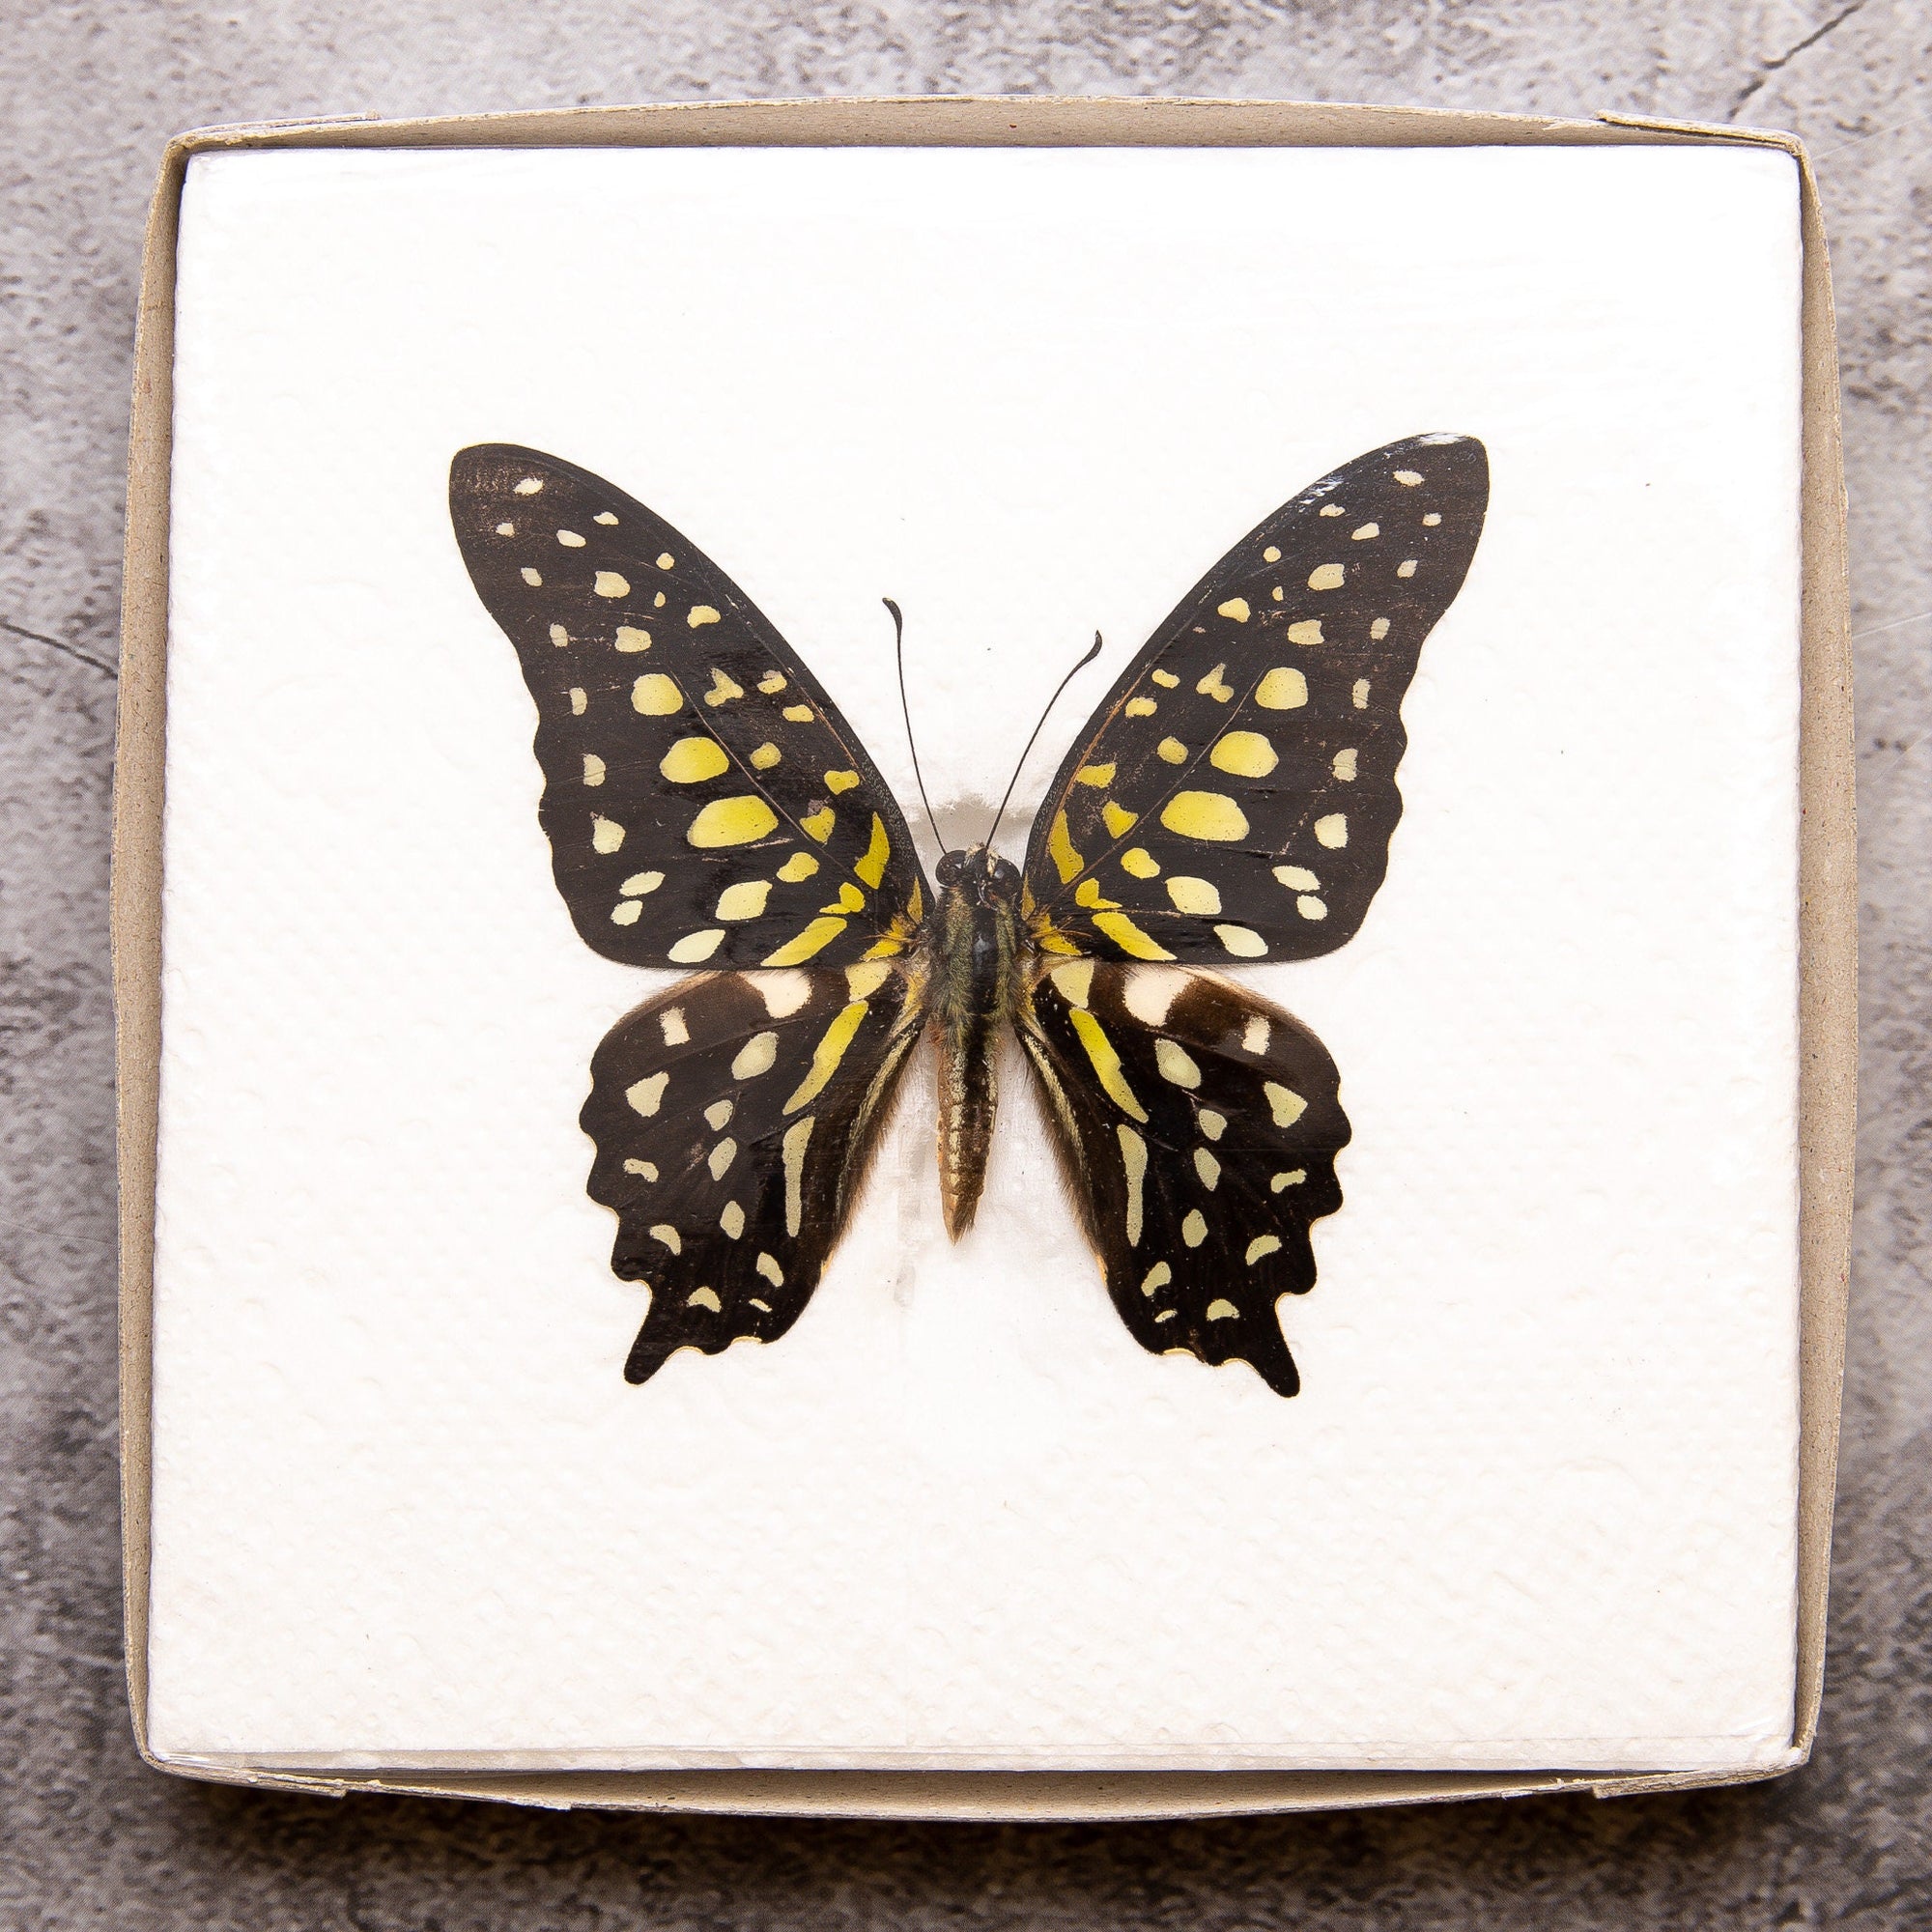 Pack of 2 Tailed Jay Butterflies (Graphium agamemnon) WINGS-SPREAD, Ethically Sourced Preserved Specimens for Collecting & Artistic